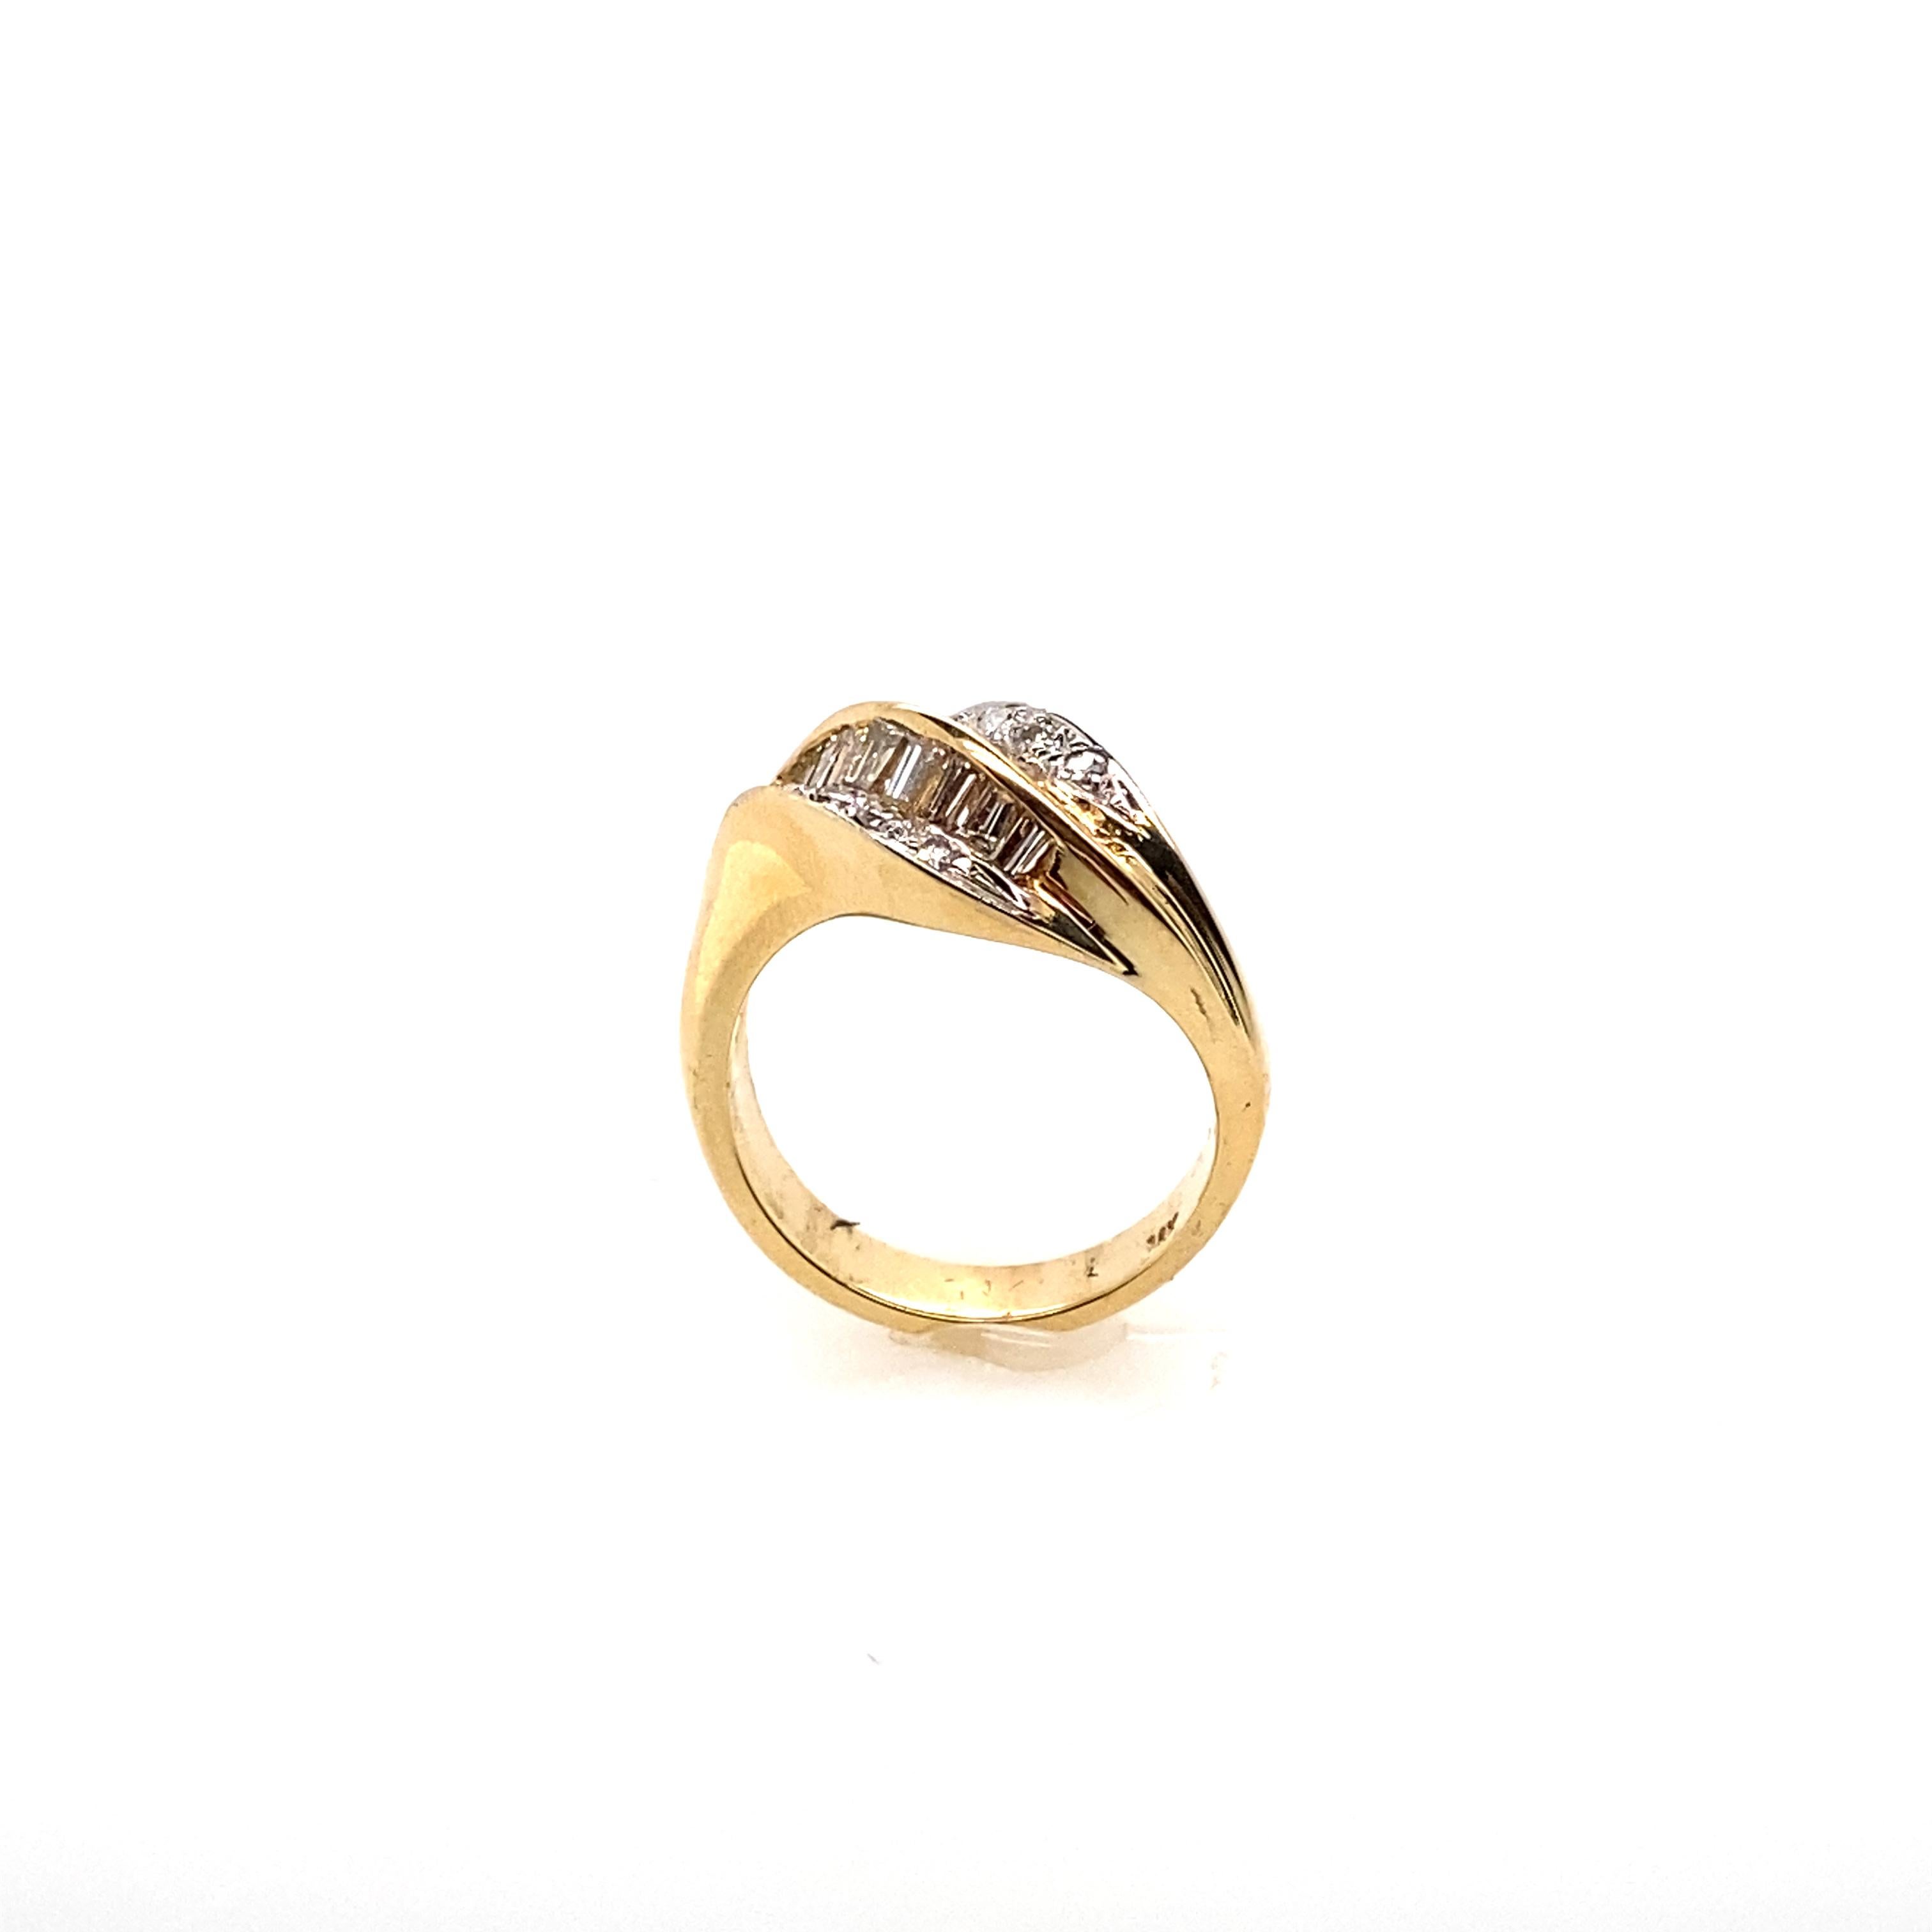 The brilliant round diamonds and baguette diamonds set in the 14K yellow gold ring featured by an usual cluster design. This ring features a very fashionable look and can be worn in everyday. 

Diamonds Weight: 1.00 carat
Diamonds Shape : Brilliant